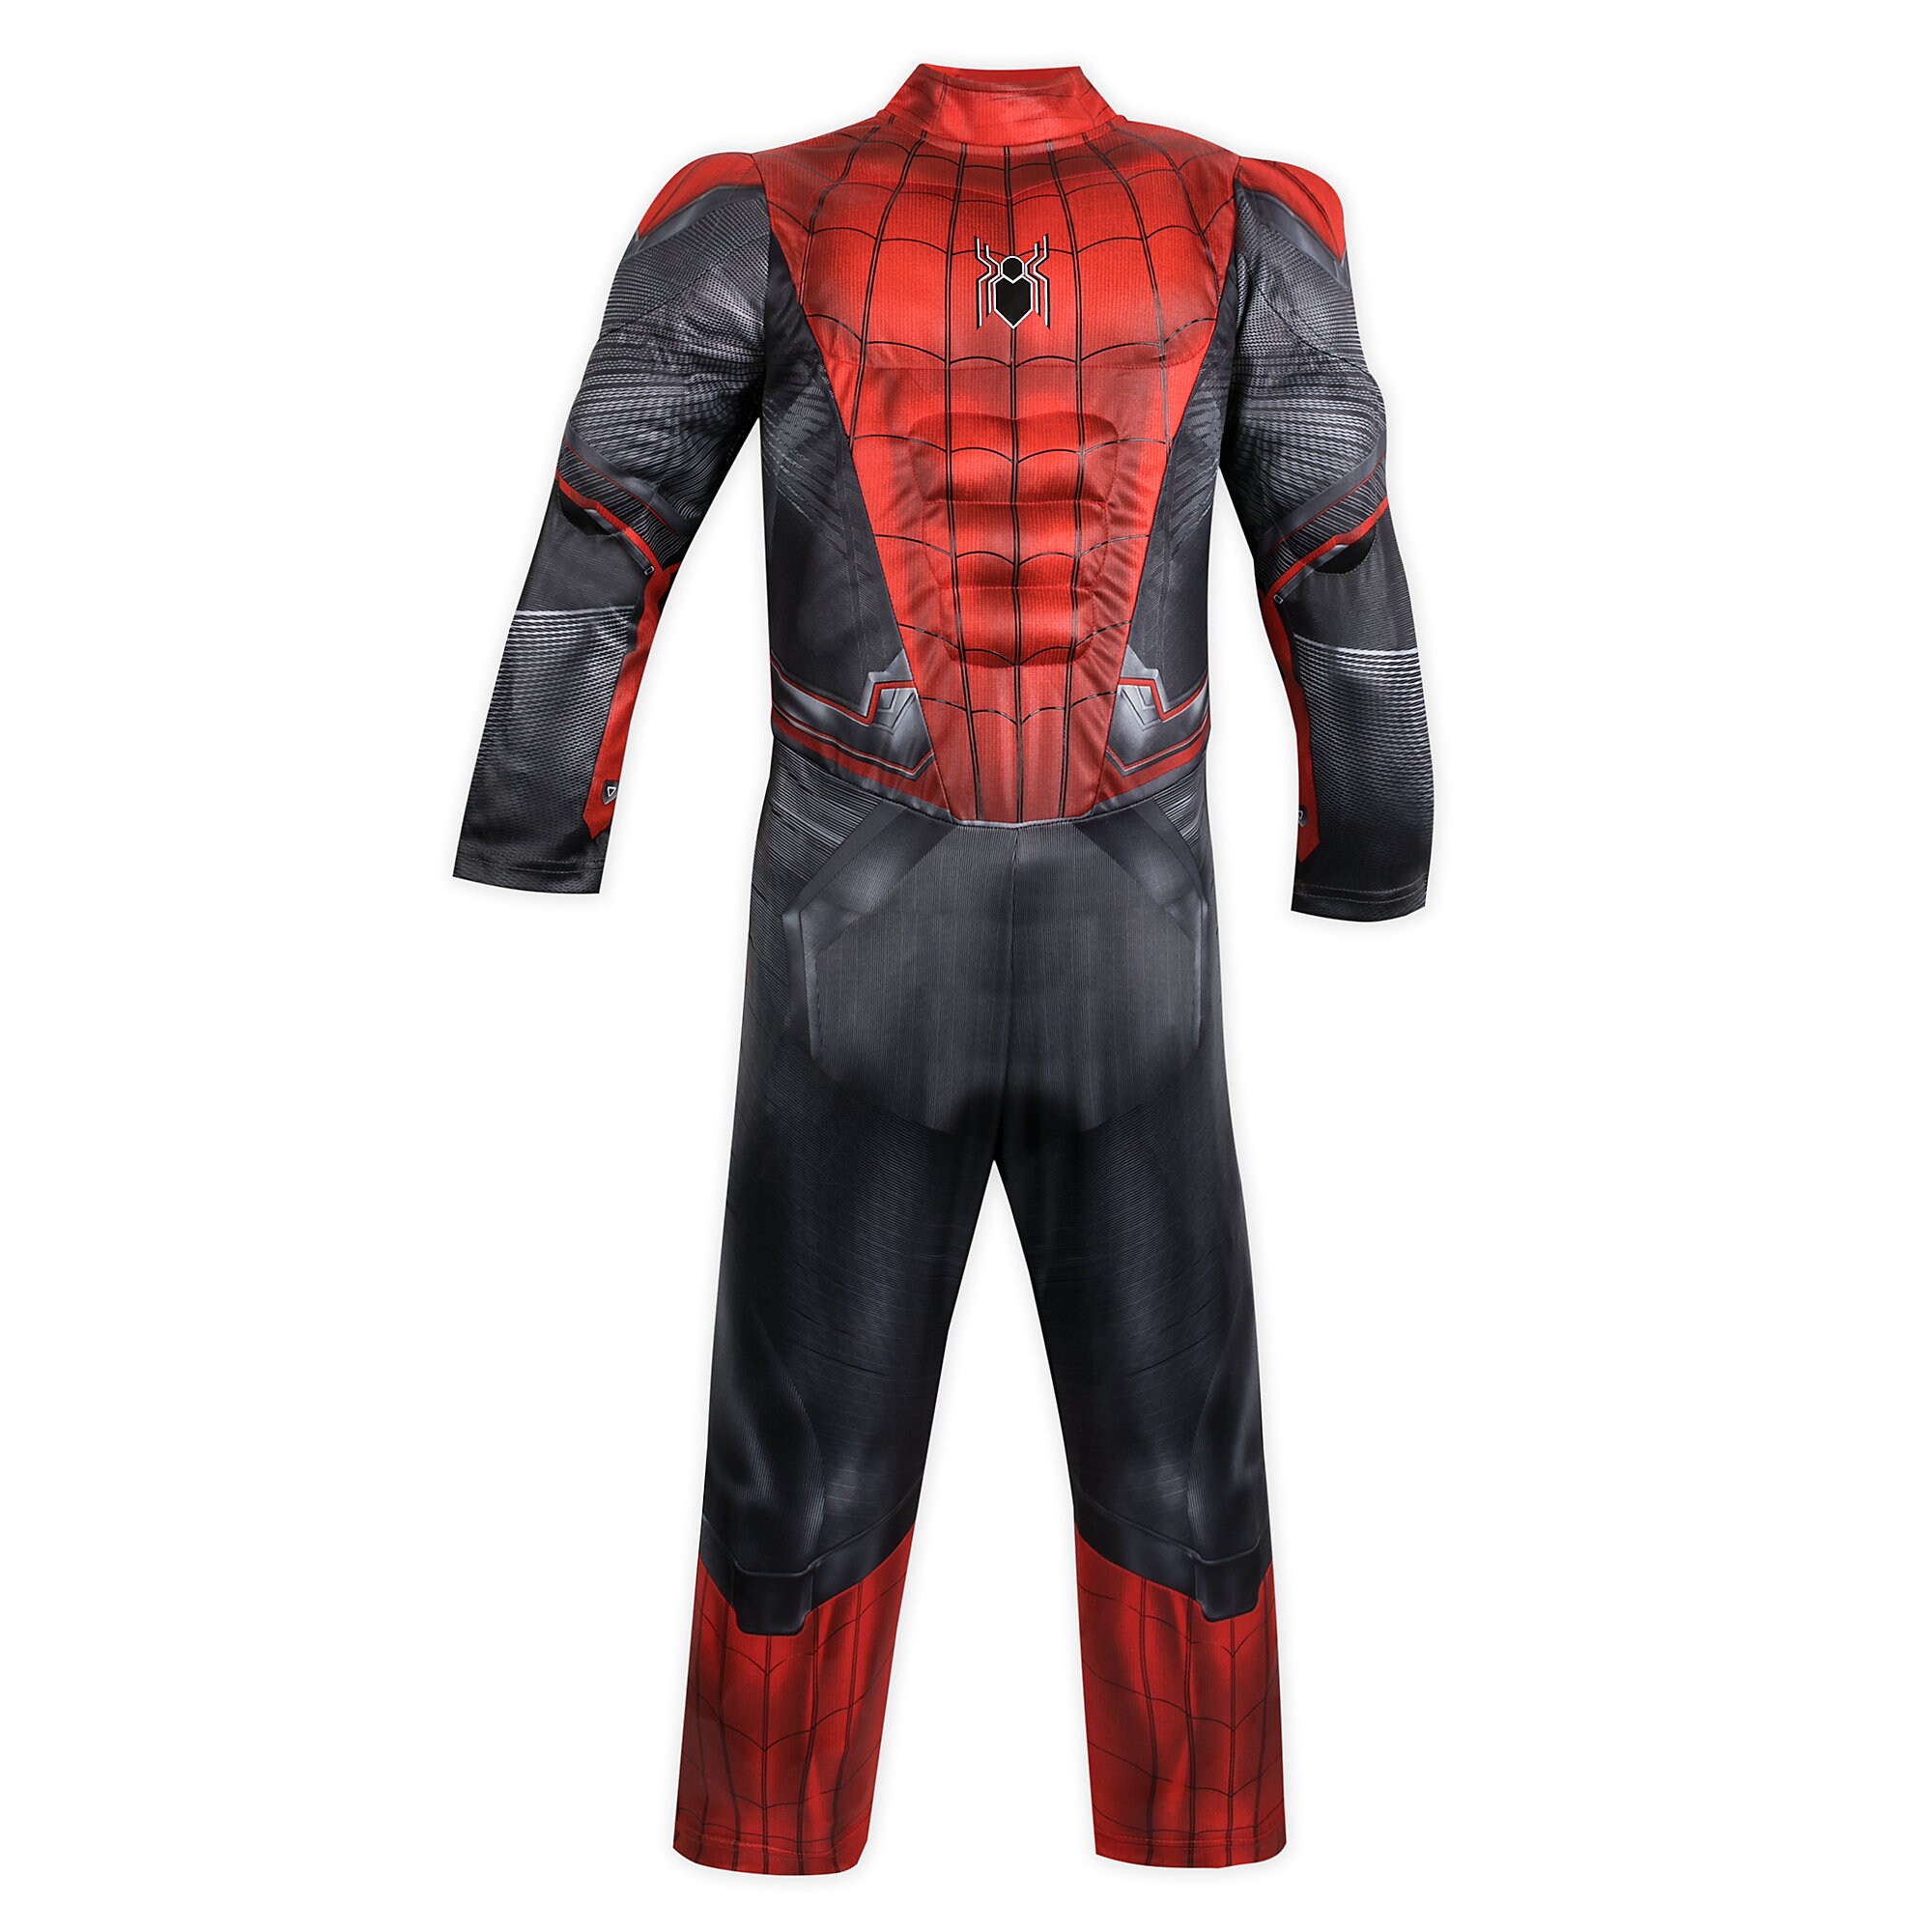 Spider-Man Costume Set for Kids - Spider-Man: Far from Home